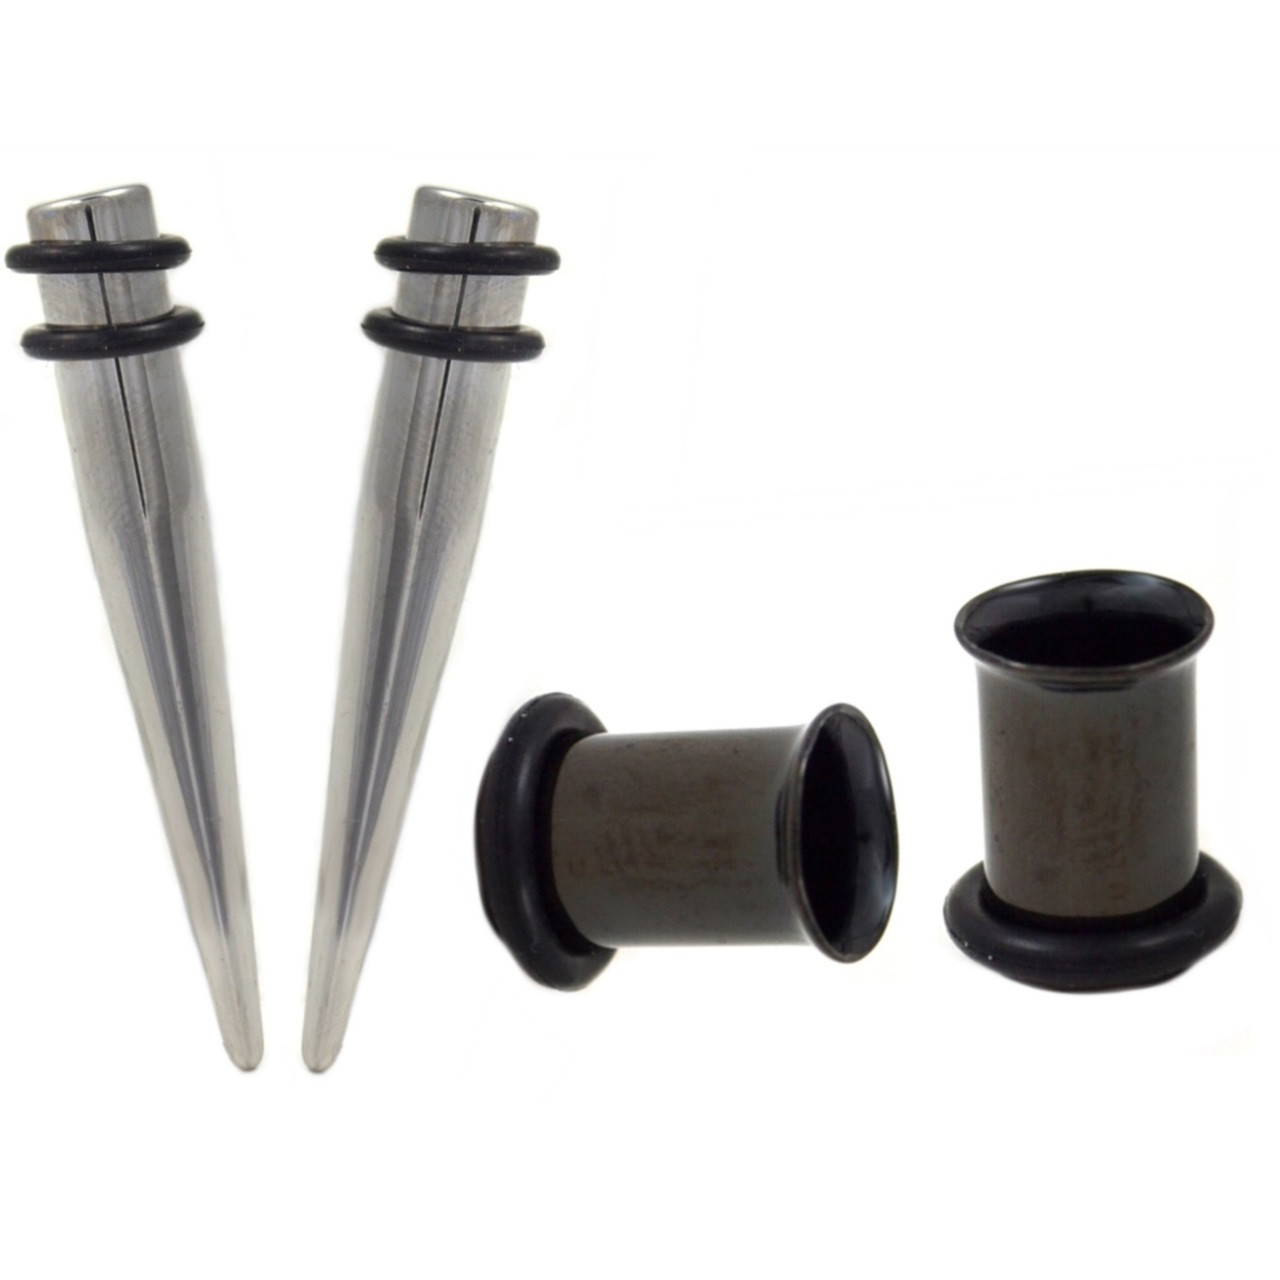 Black Titanium IP Coated Stainless Steel Taper Ear Stretcher 